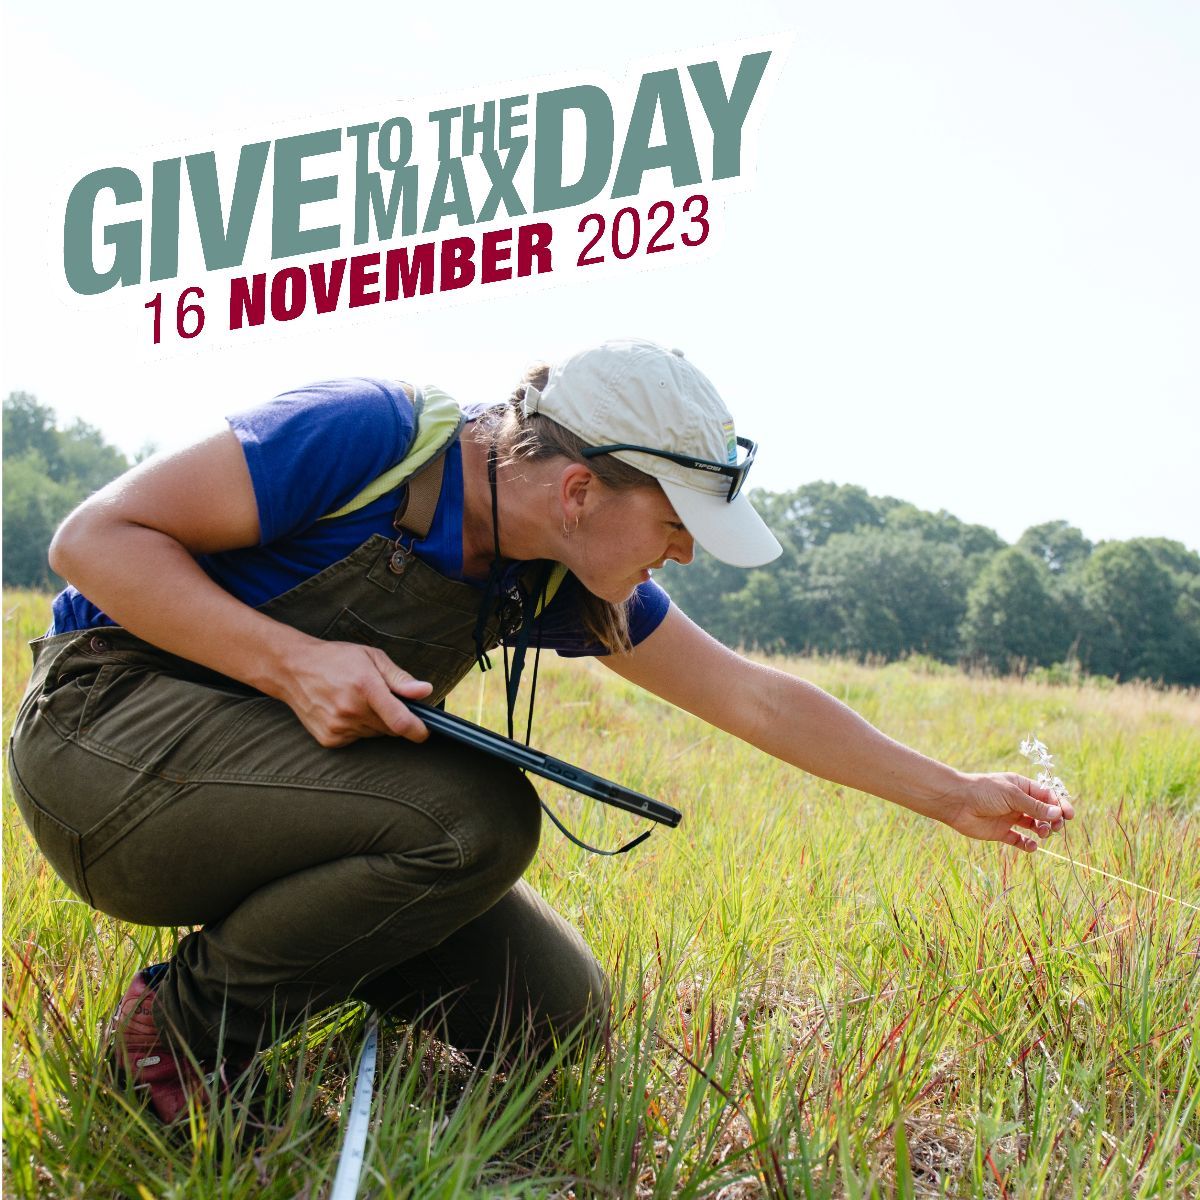 Today is Give to the Max Day! Our goal is to raise $11,500 for the Dean's Research Program which provides paid research opportunities to students. Your gift will be matched 1:1! Gifts of any size can make an impact, it all adds up! Visit buff.ly/478uBC4. @umn_give